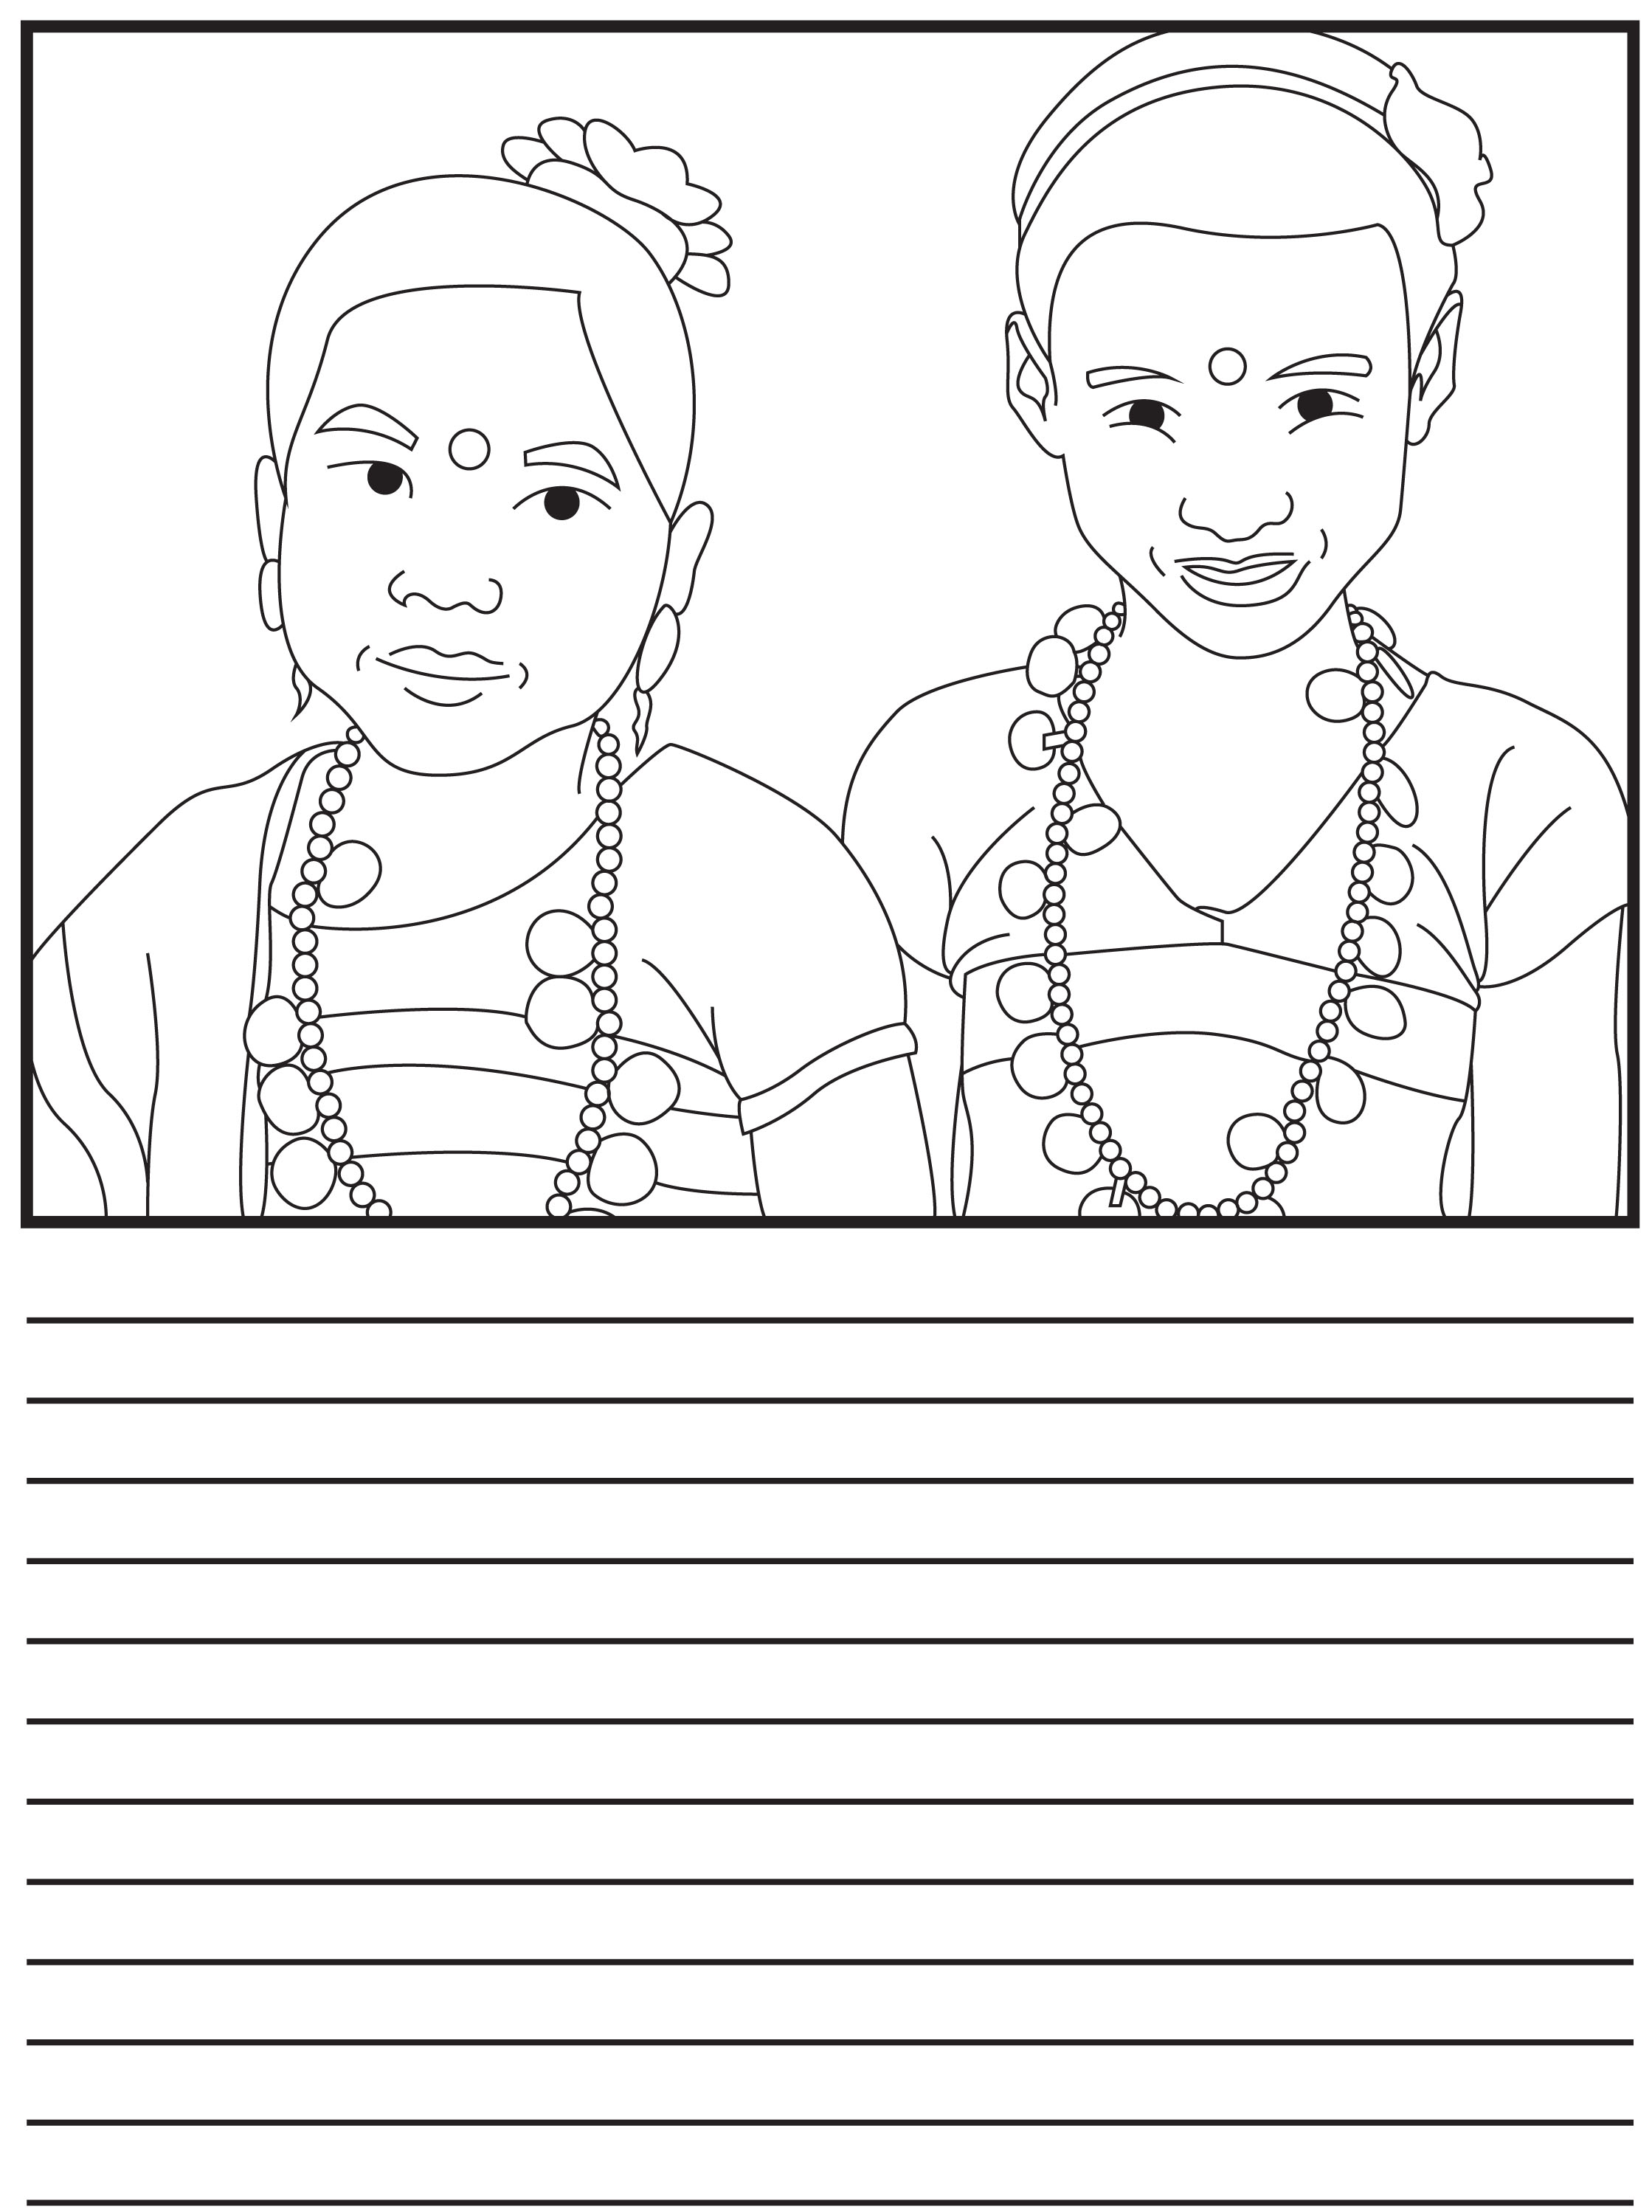 CHT Coloring Book-7